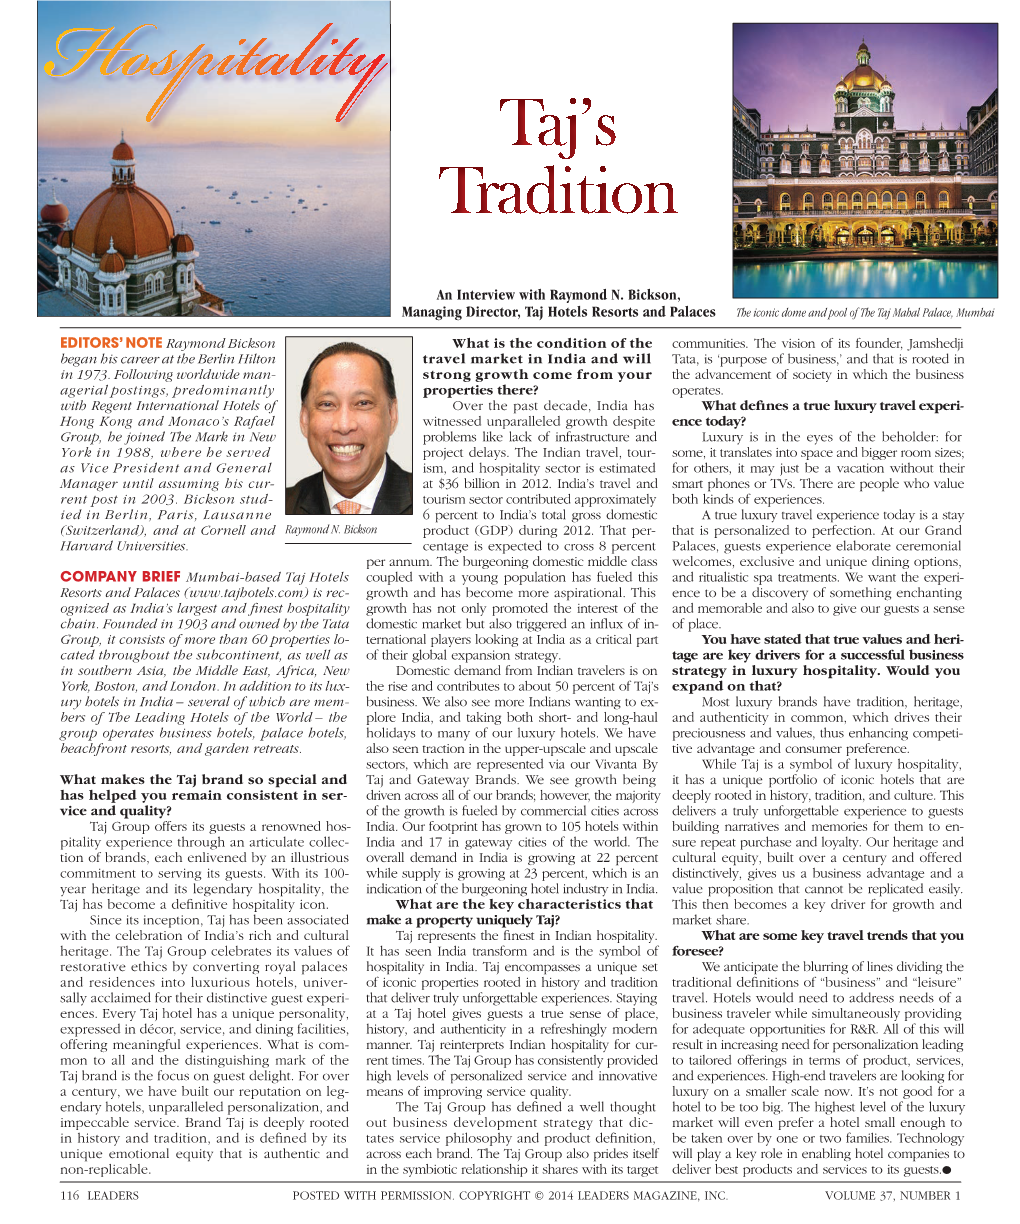 An Interview with Raymond N. Bickson, Managing Director, Taj Hotels Resorts and Palaces the Iconic Dome and Pool of the Taj Mahal Palace, Mumbai